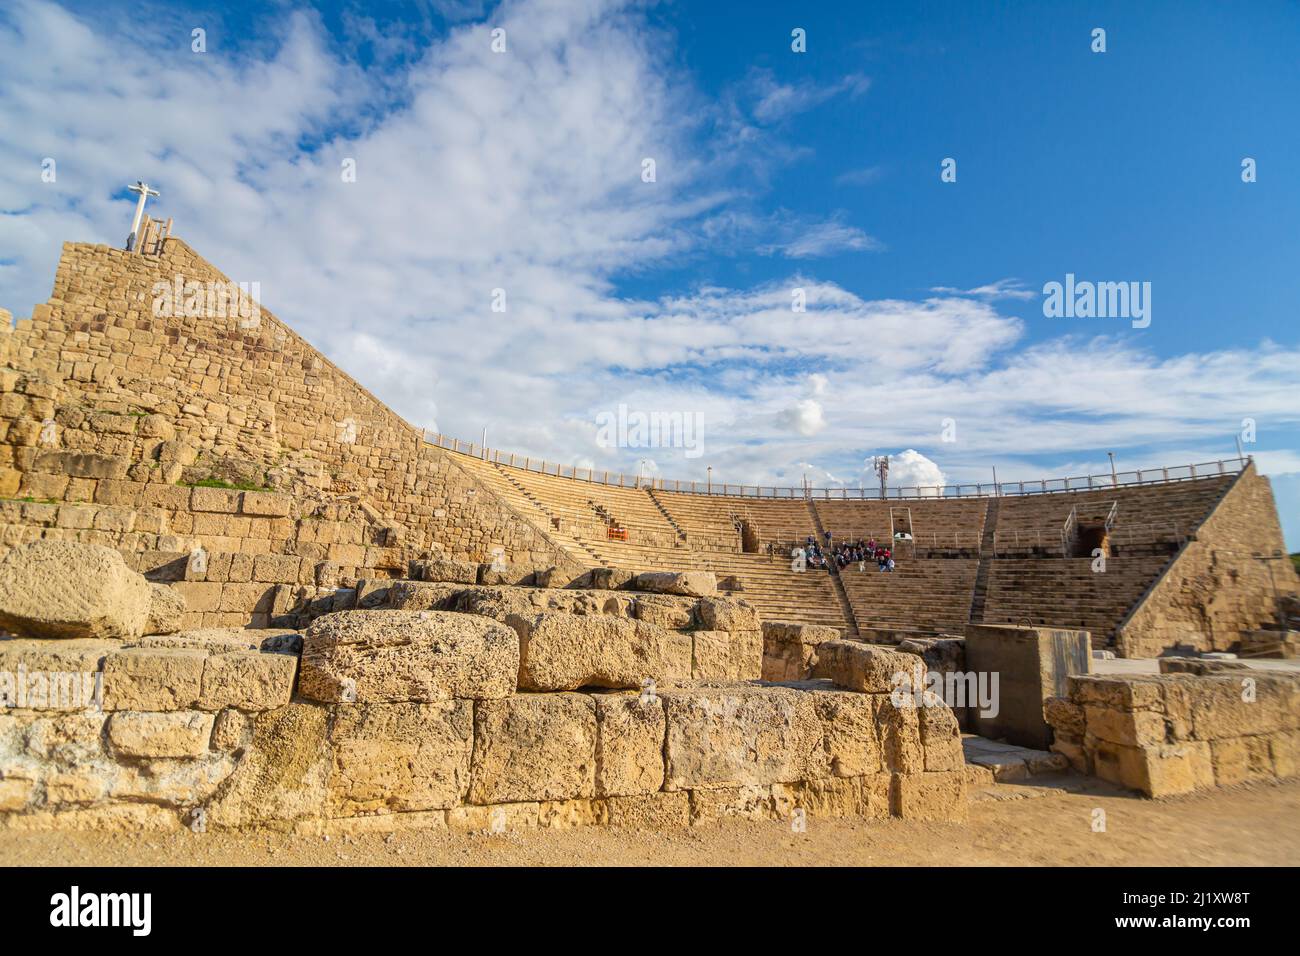 Medieval amphitheater built of stones. Stock Photo